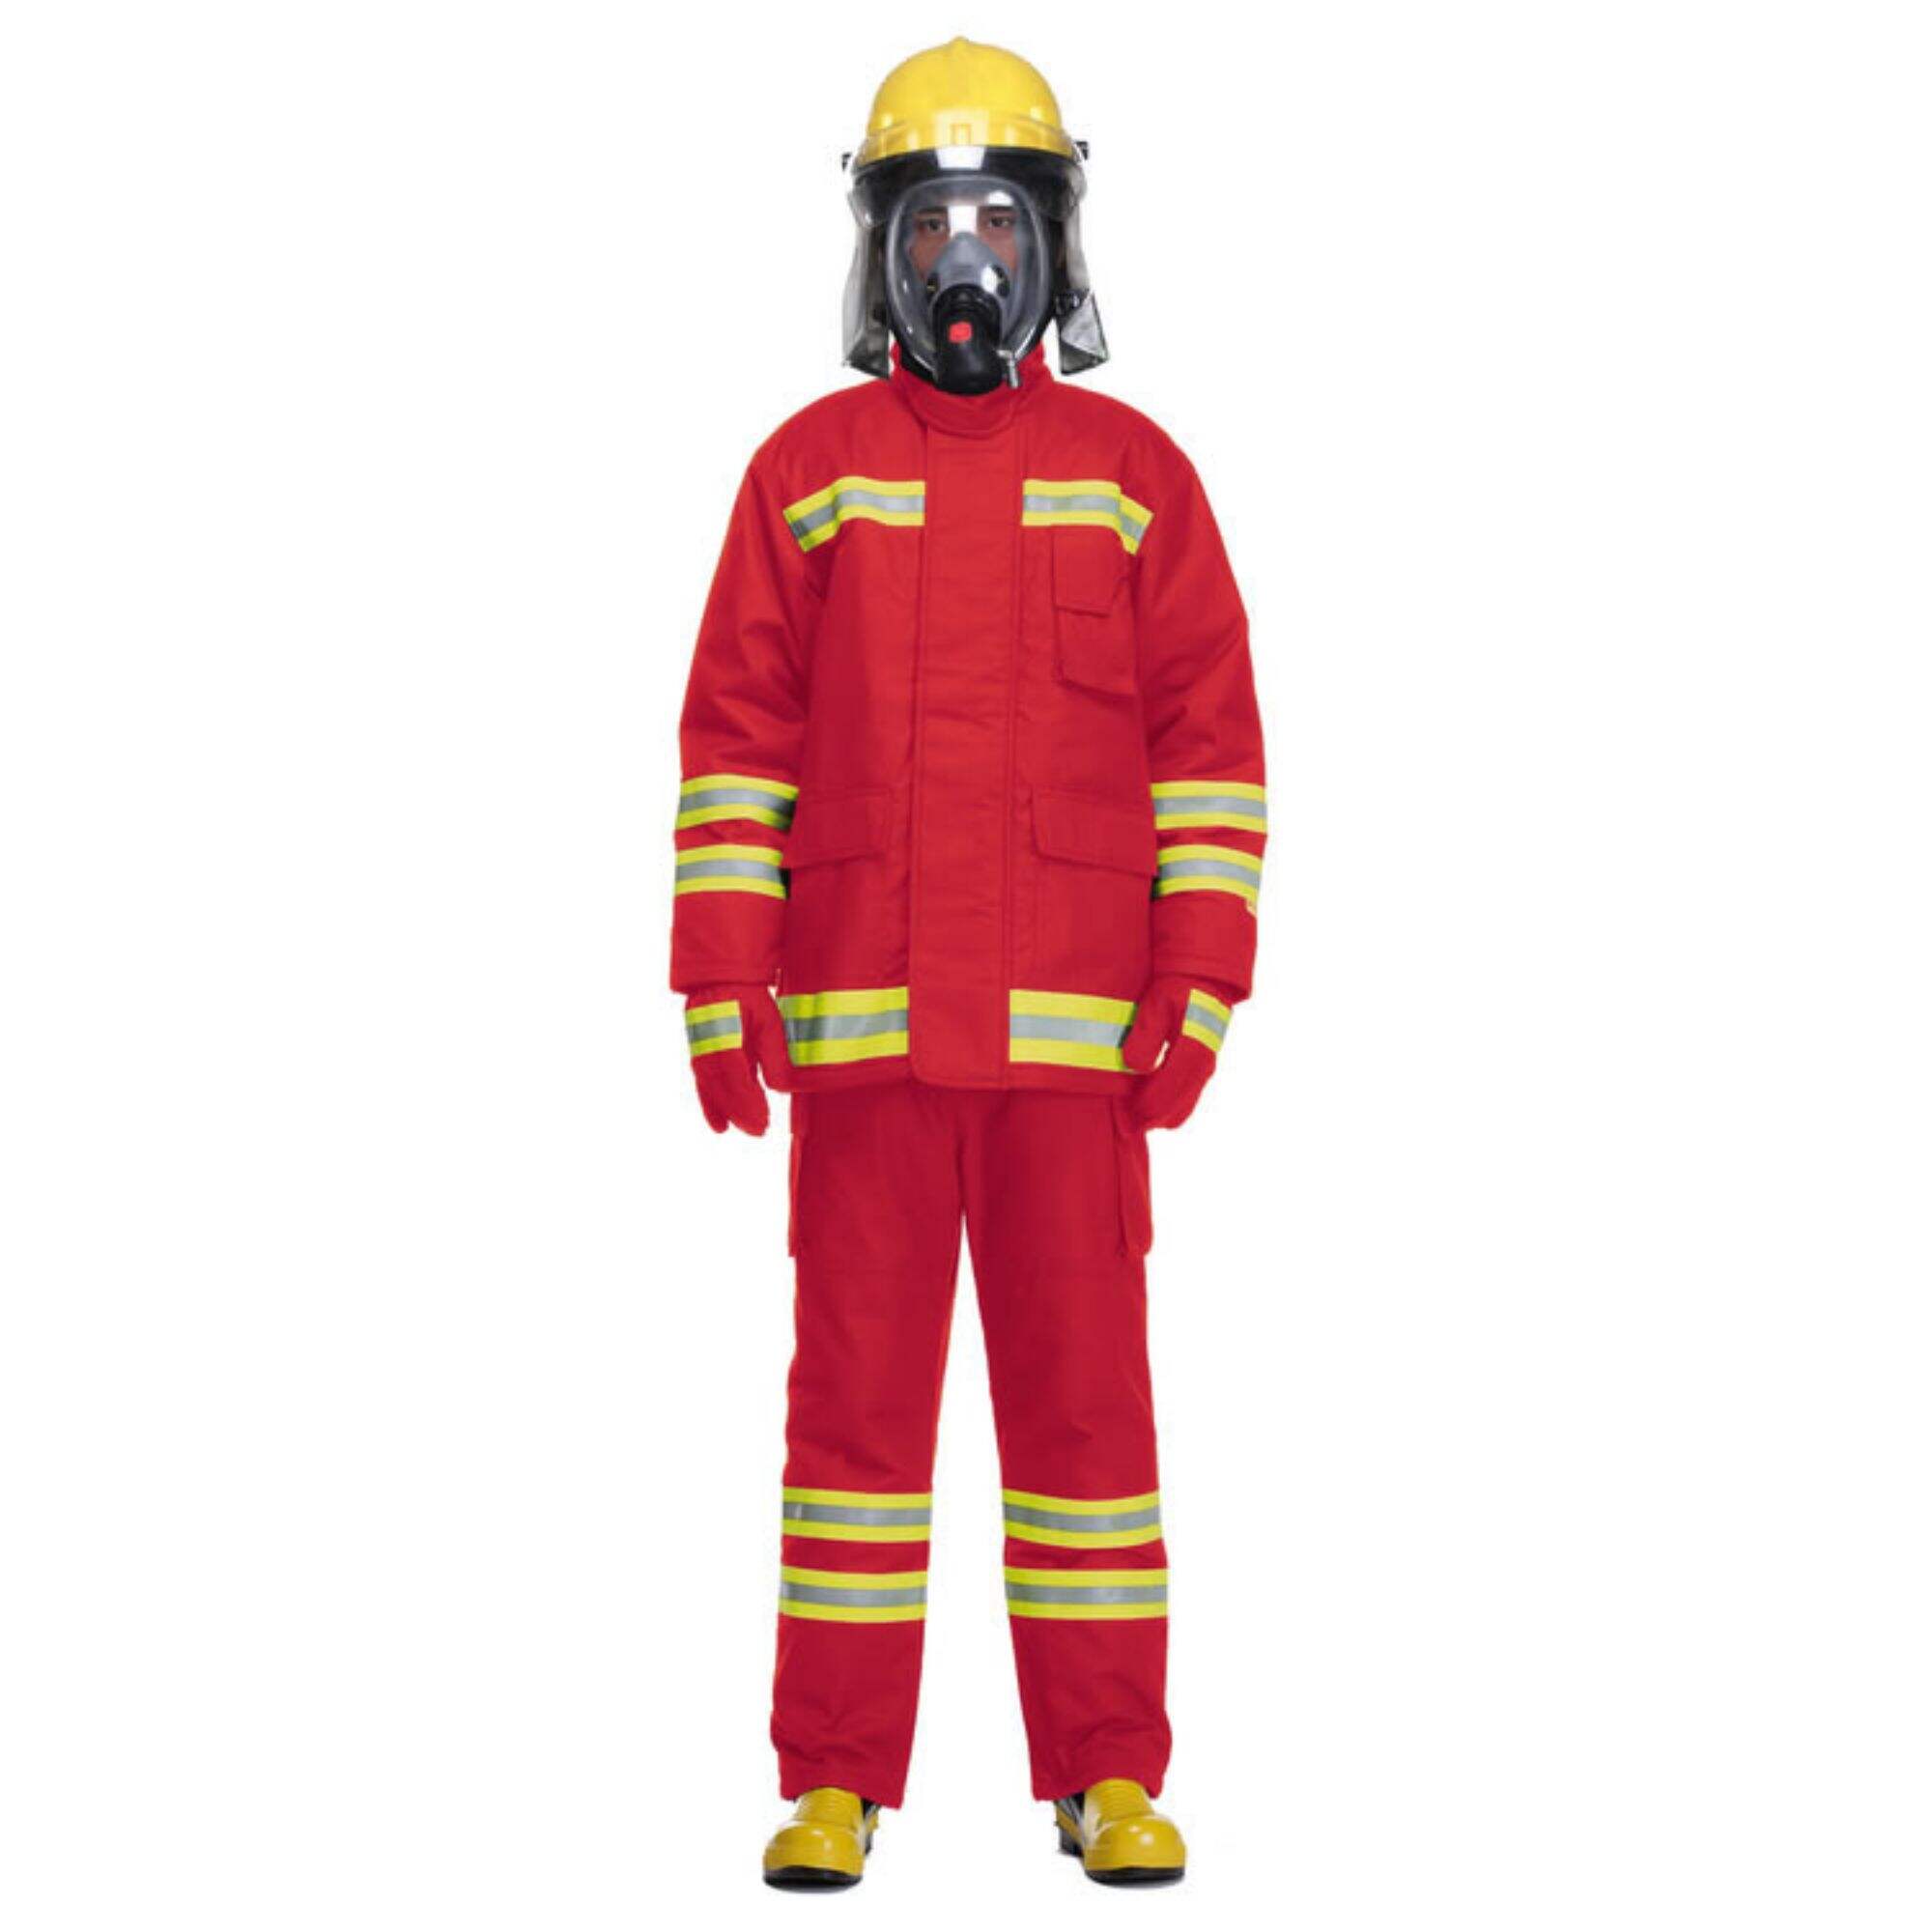 EN 469 Extreme Protect Aramid Shell 4 Layers Nomex Fire Fighter Fireman Fire Fighting Firefighter Suits